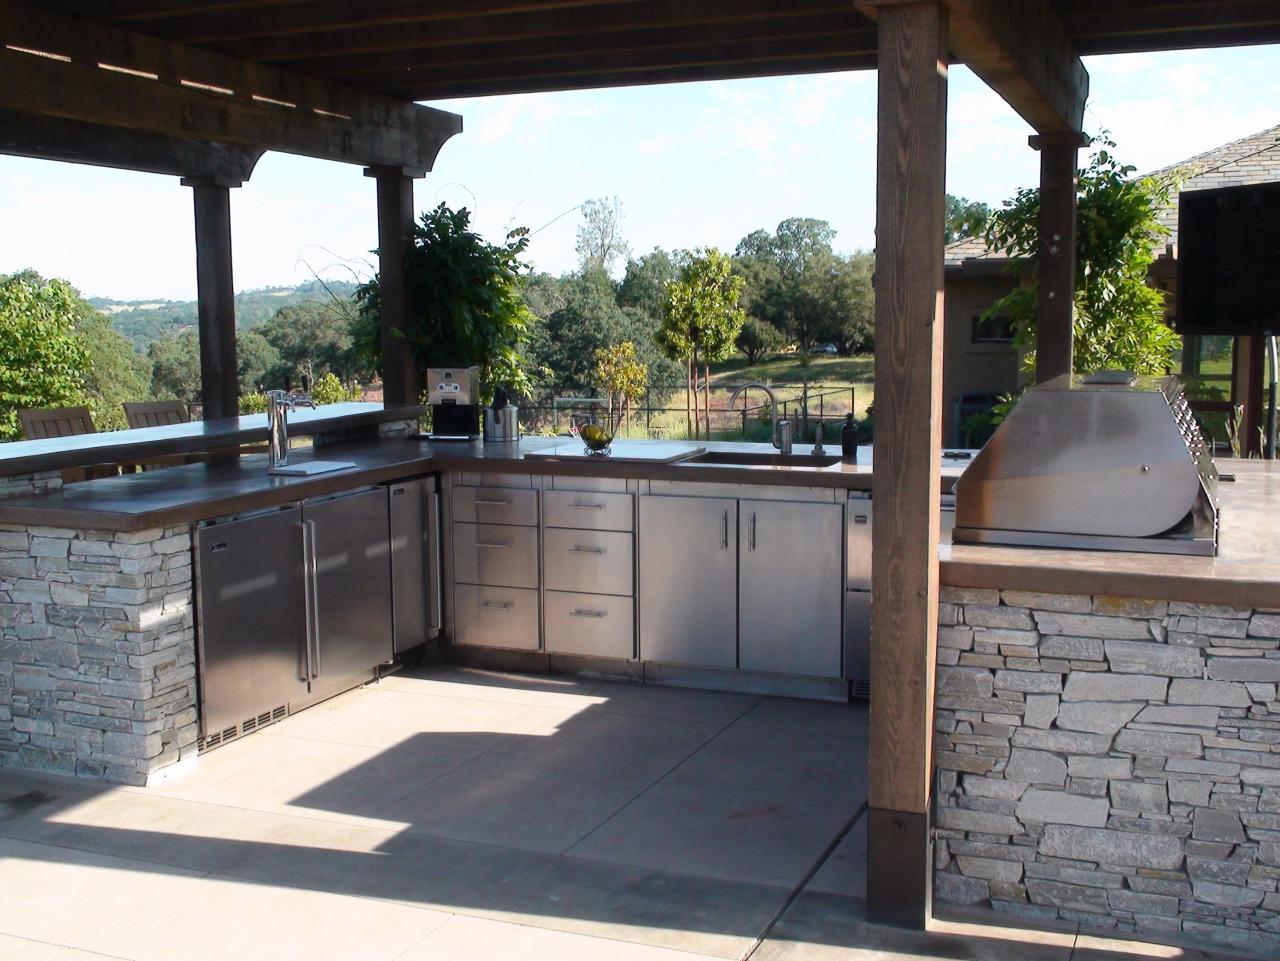 Optimizing An Outdoor Kitchen Layout, Outdoor Grill Designs Plans